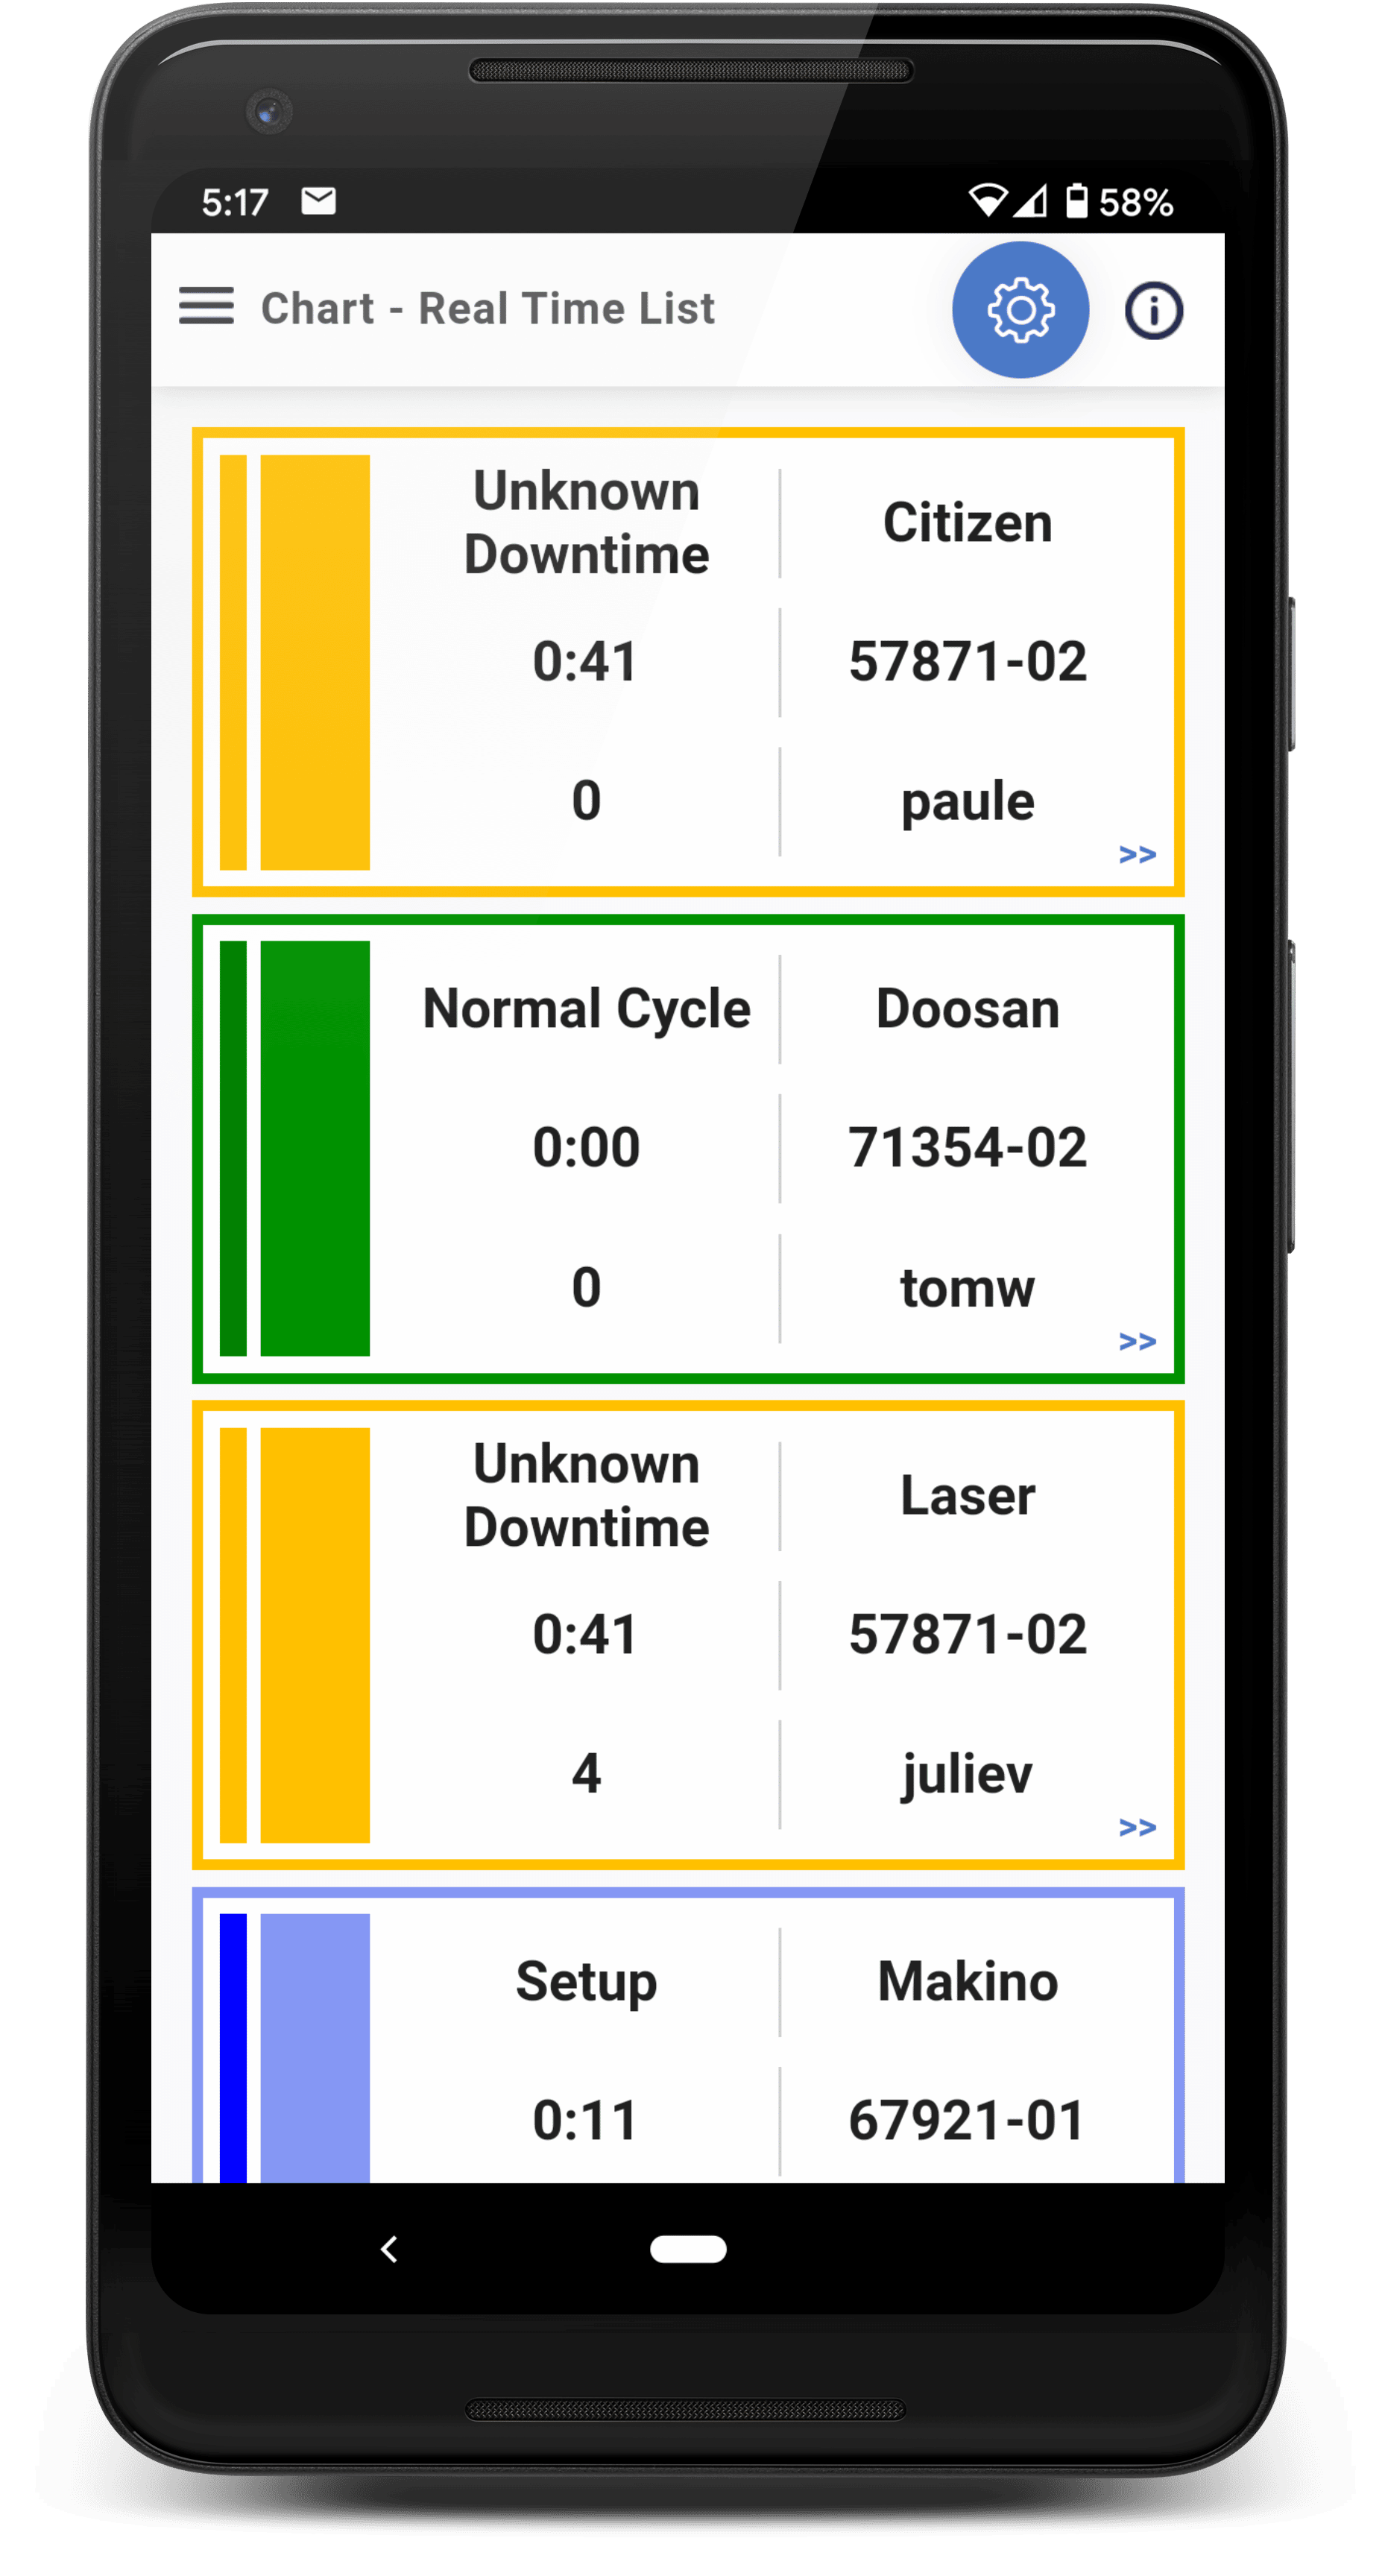 A smartphone displaying the Real Time List screen on DataXchange's mobile machine monitoring app. Four color-coded tables are listed, showing each machine and its current status and operator, along with cycle times and/or downtimes.